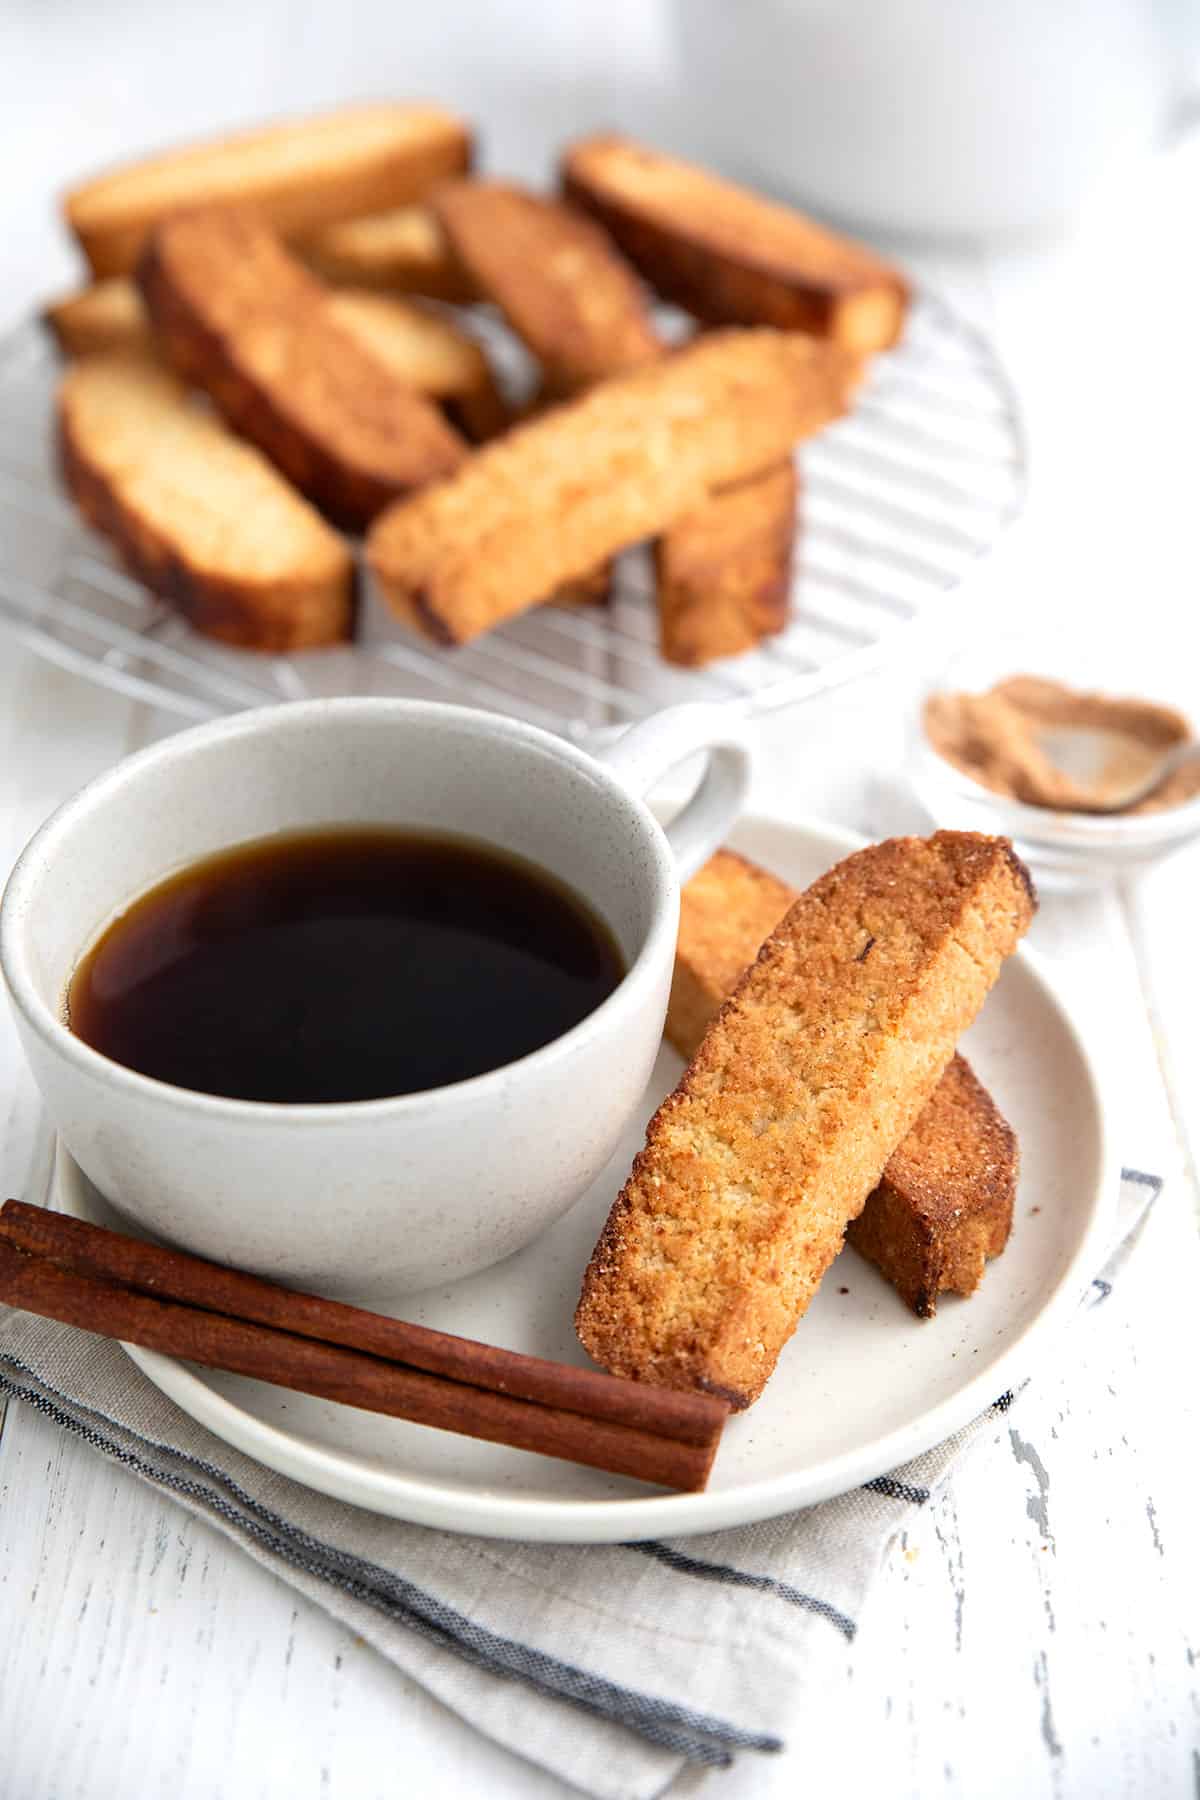 Two keto biscotti on a white plate with a cup of coffee and a cinnamon stick.